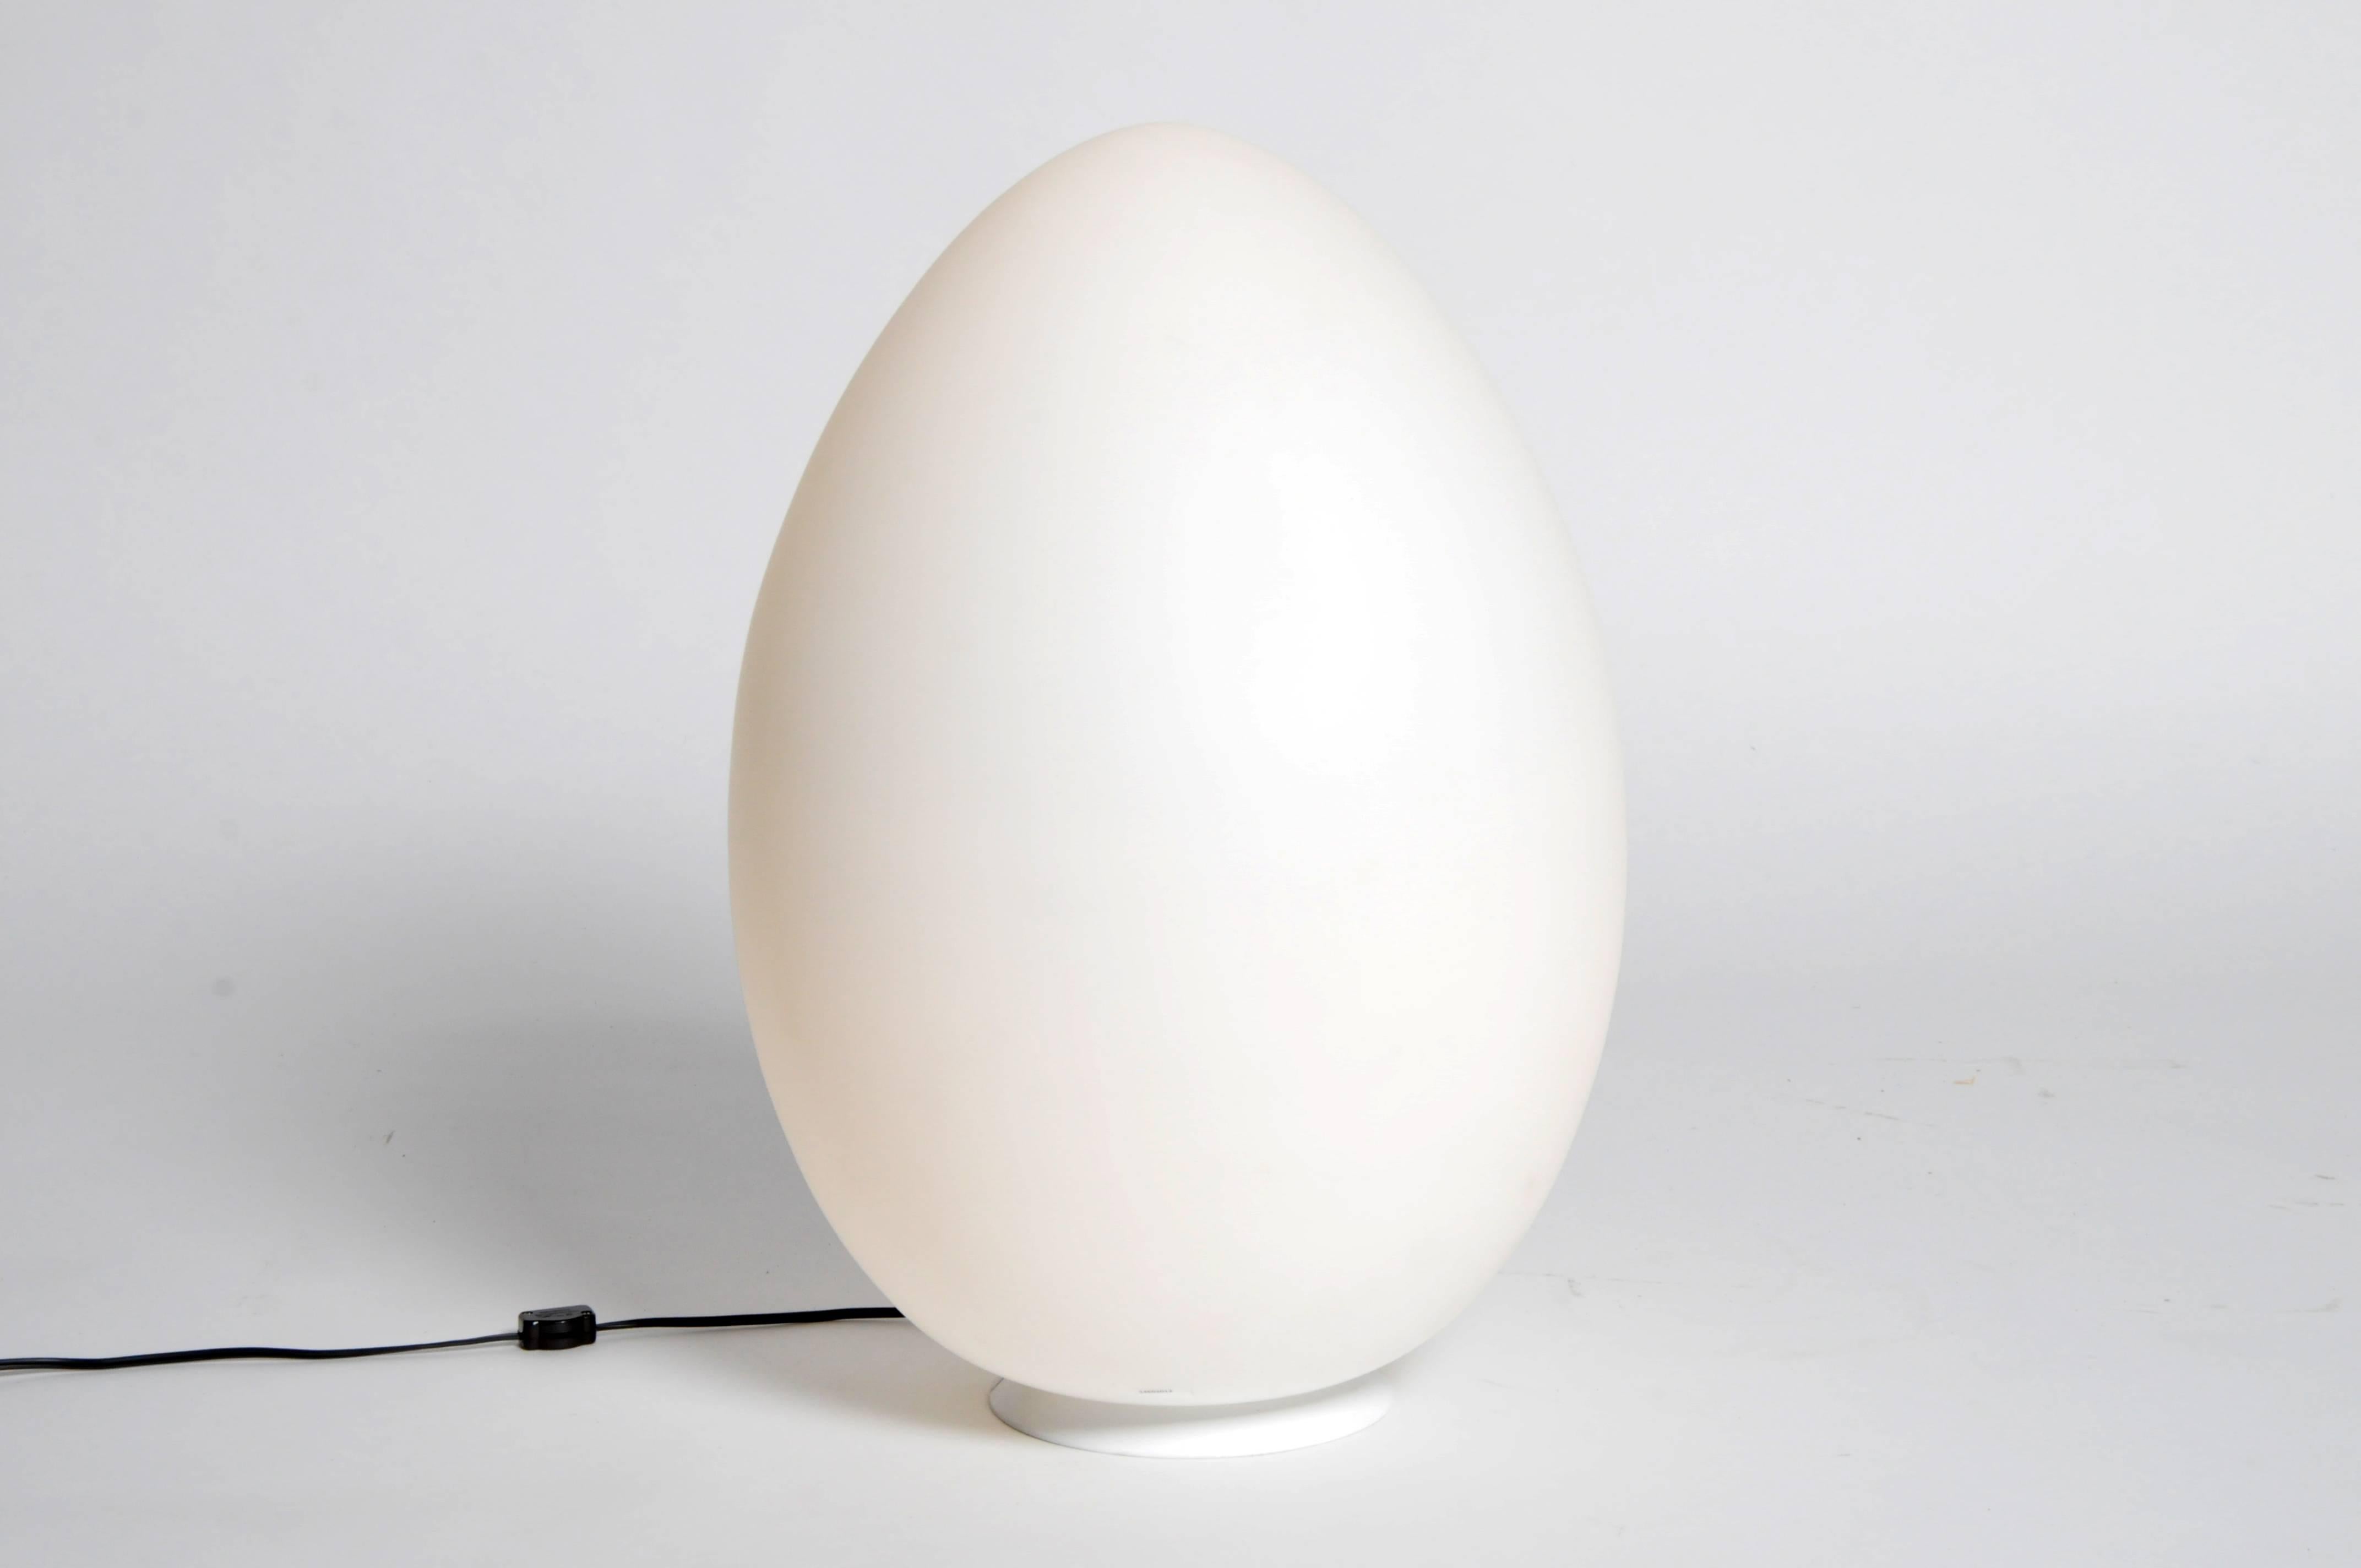 Made from handblown opaline glass, these lights are expertly crafted and emit a soft nebulous glow. The ovular streamline forms are secured to circular white metal bases. Chic additions to any modern interior, we also think they would look exquisite